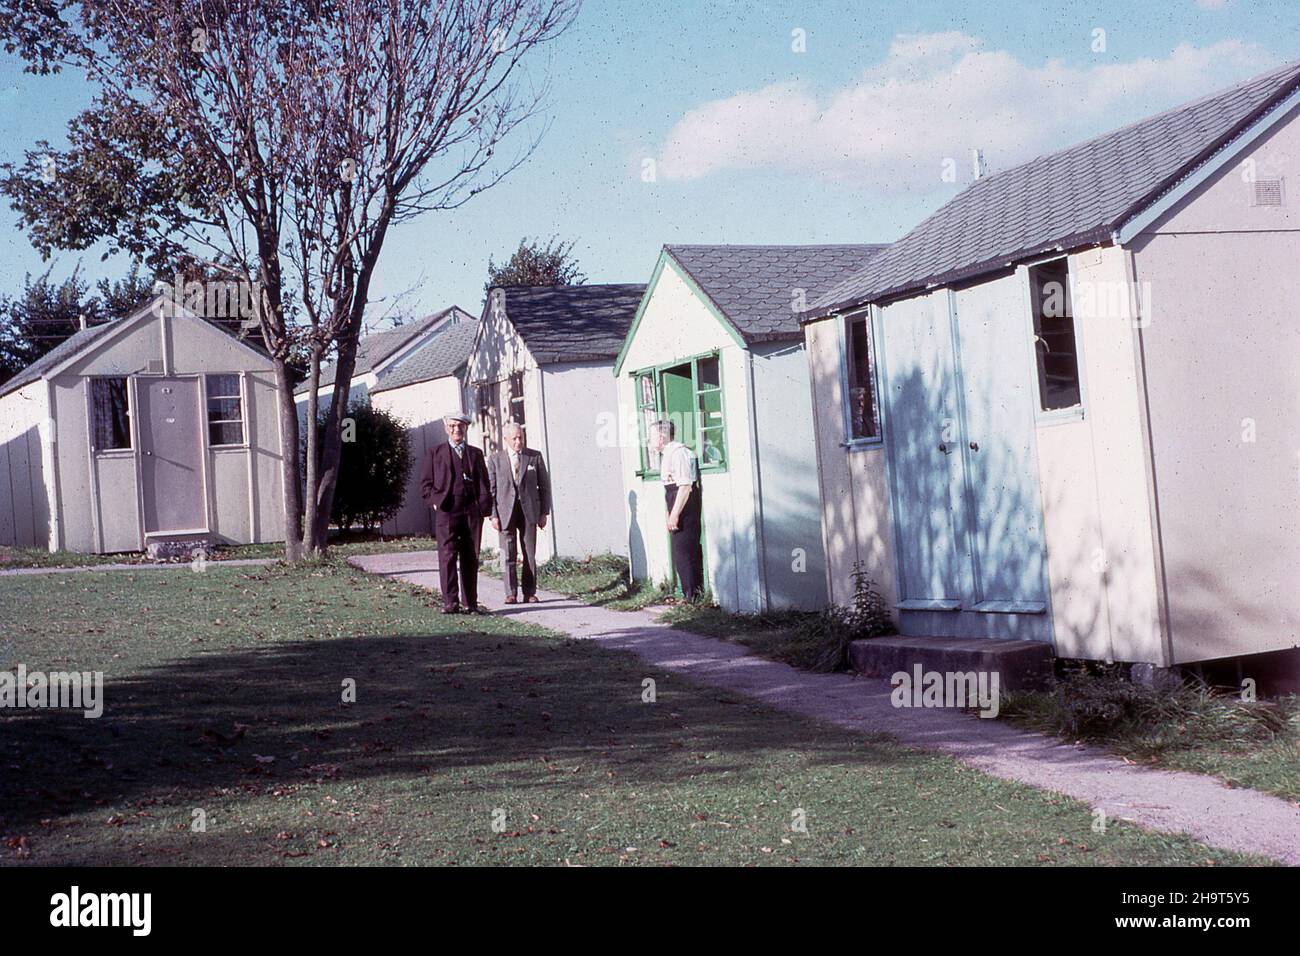 1964, historical, two gentlemen outside on a path and another gentleman standing a the entrance to his chalet at a Pontin's holiday camp, England, UK. Founded by Fred Pontin in 1946, the camps offered affordable holidays for the working man and his family, with basic accomodation in small single-storey pre-fab huts or chalets and on-site dining, sports activities and entertainment. The British holiday camp industry boomed from the end of WW2 to the 60s, but in the 1970s the rapid growth of the overseas package holiday saw it decline and in the 1980s many sites closed. Stock Photo